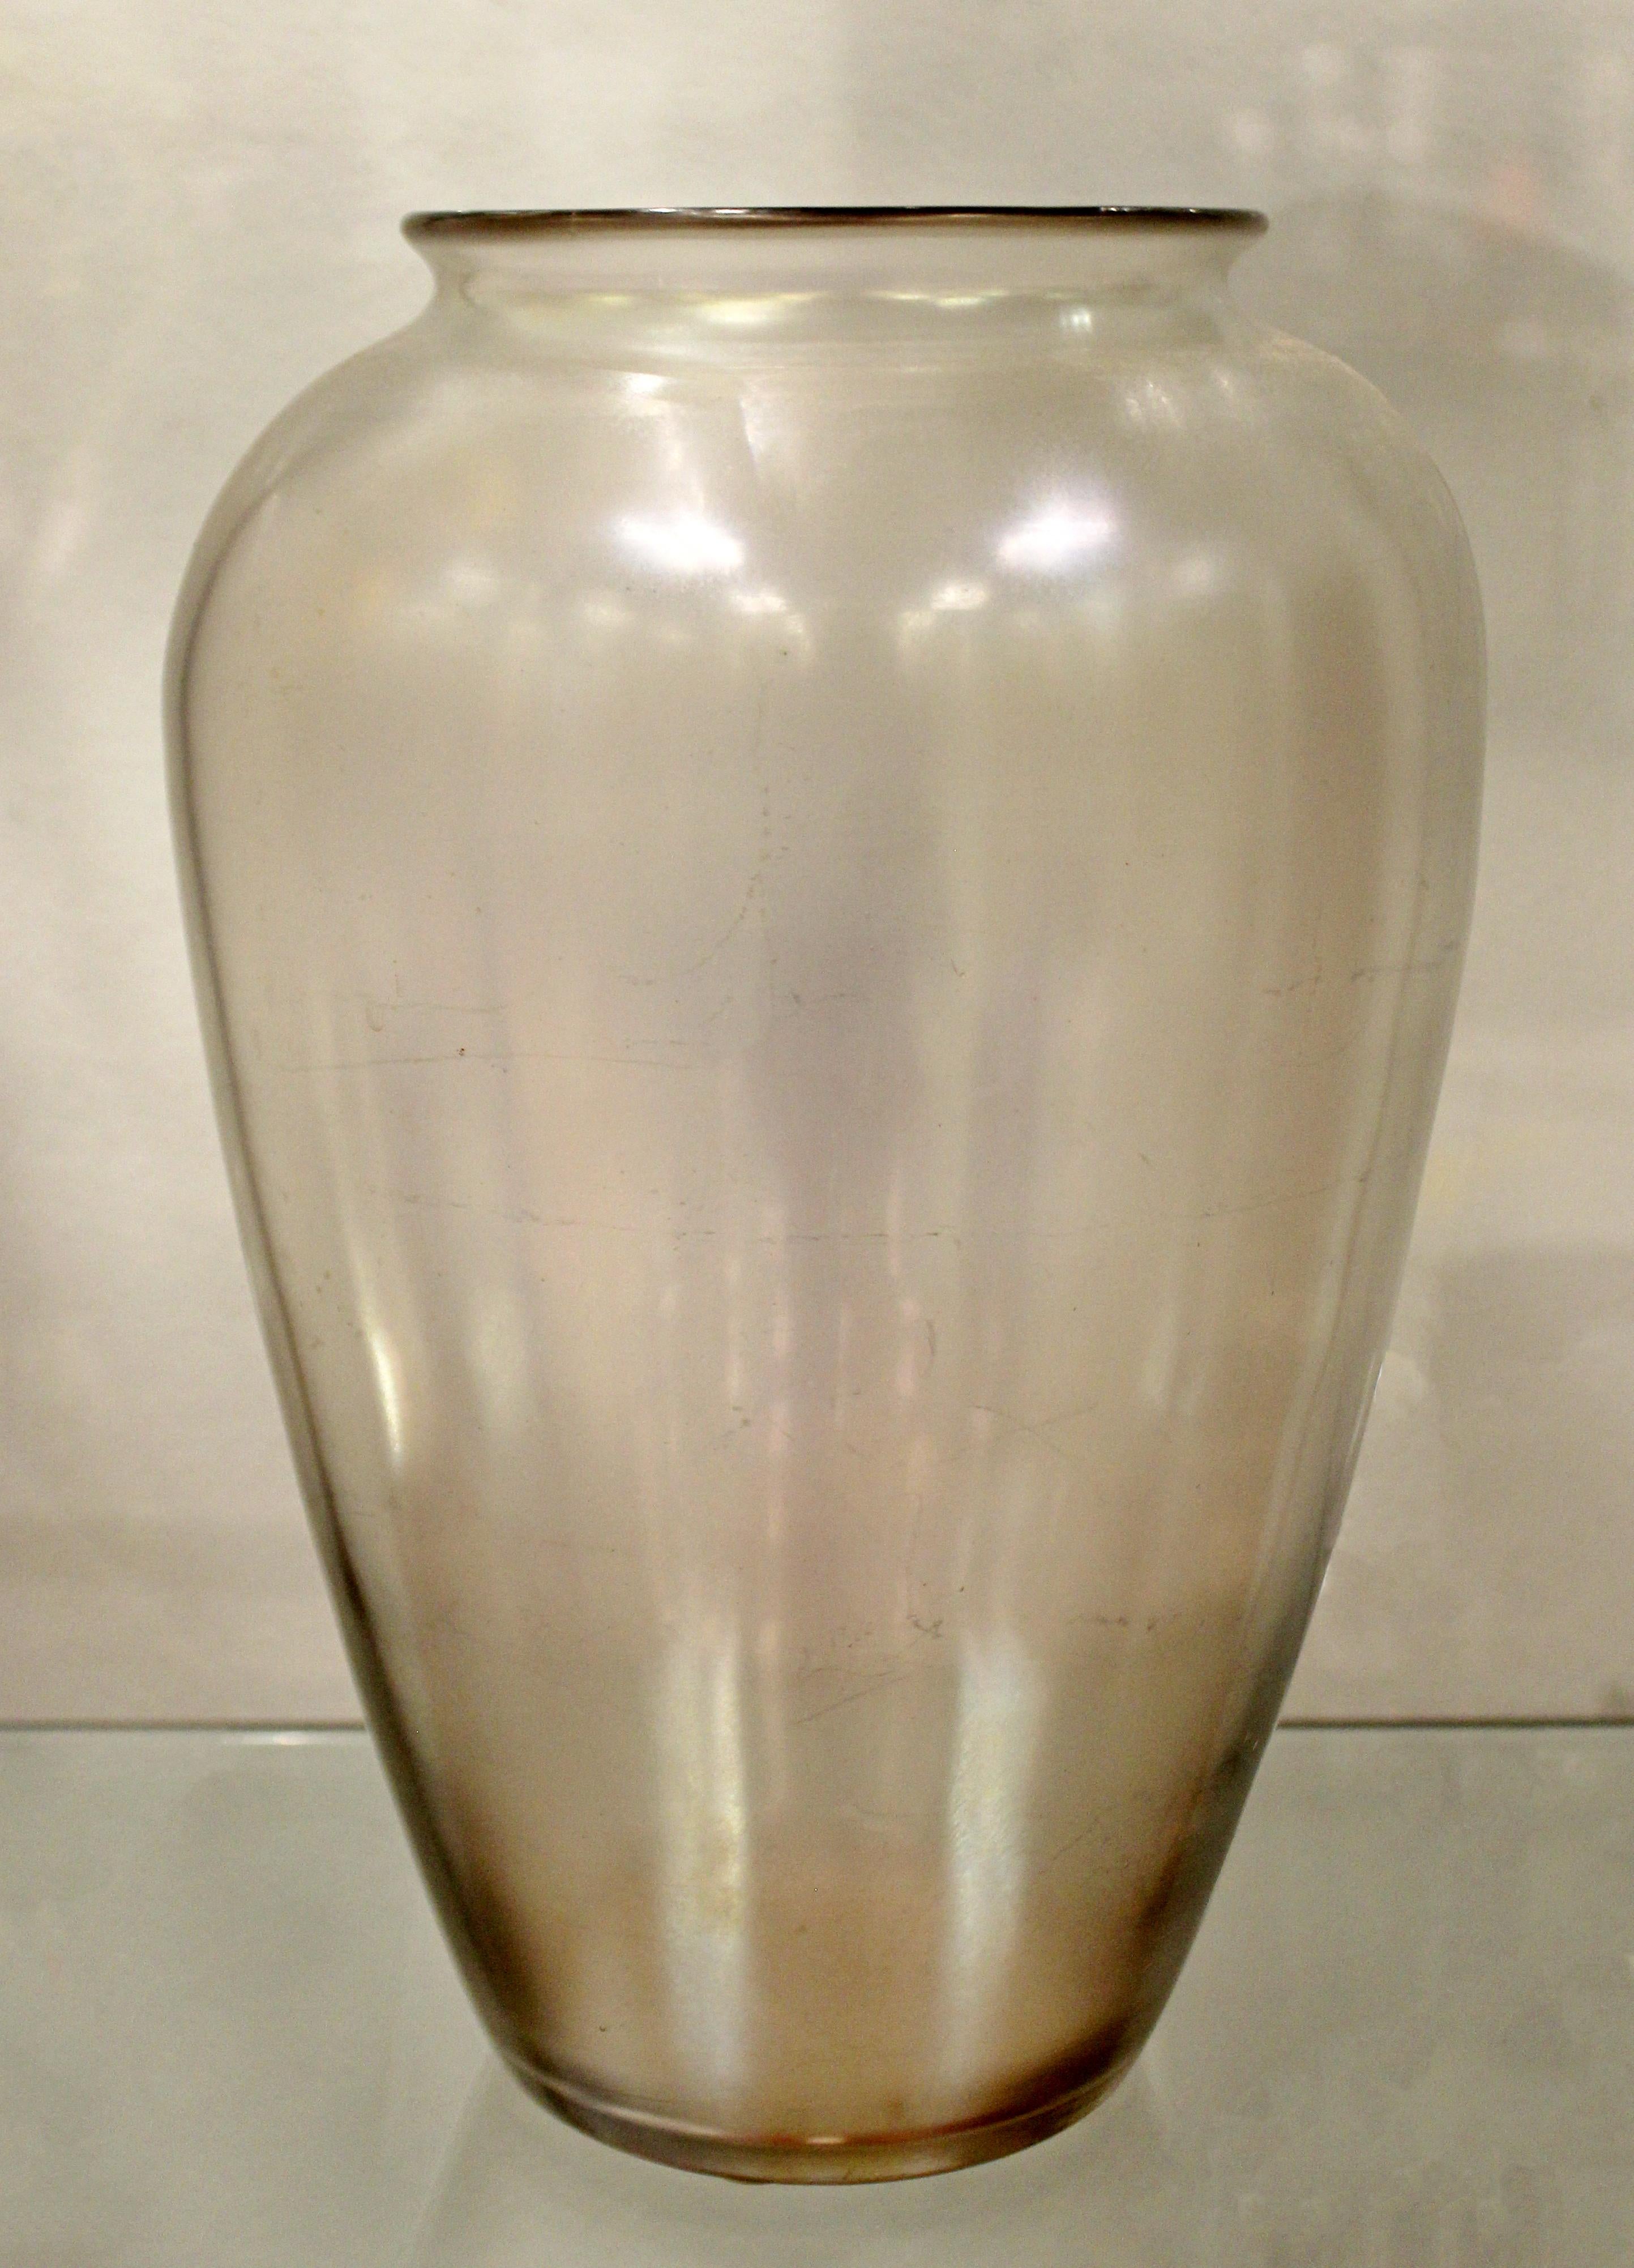 For your consideration is an opaline, iridescent, Steuben glass art vase, circa 1960s. In excellent condition. The dimensions are 7